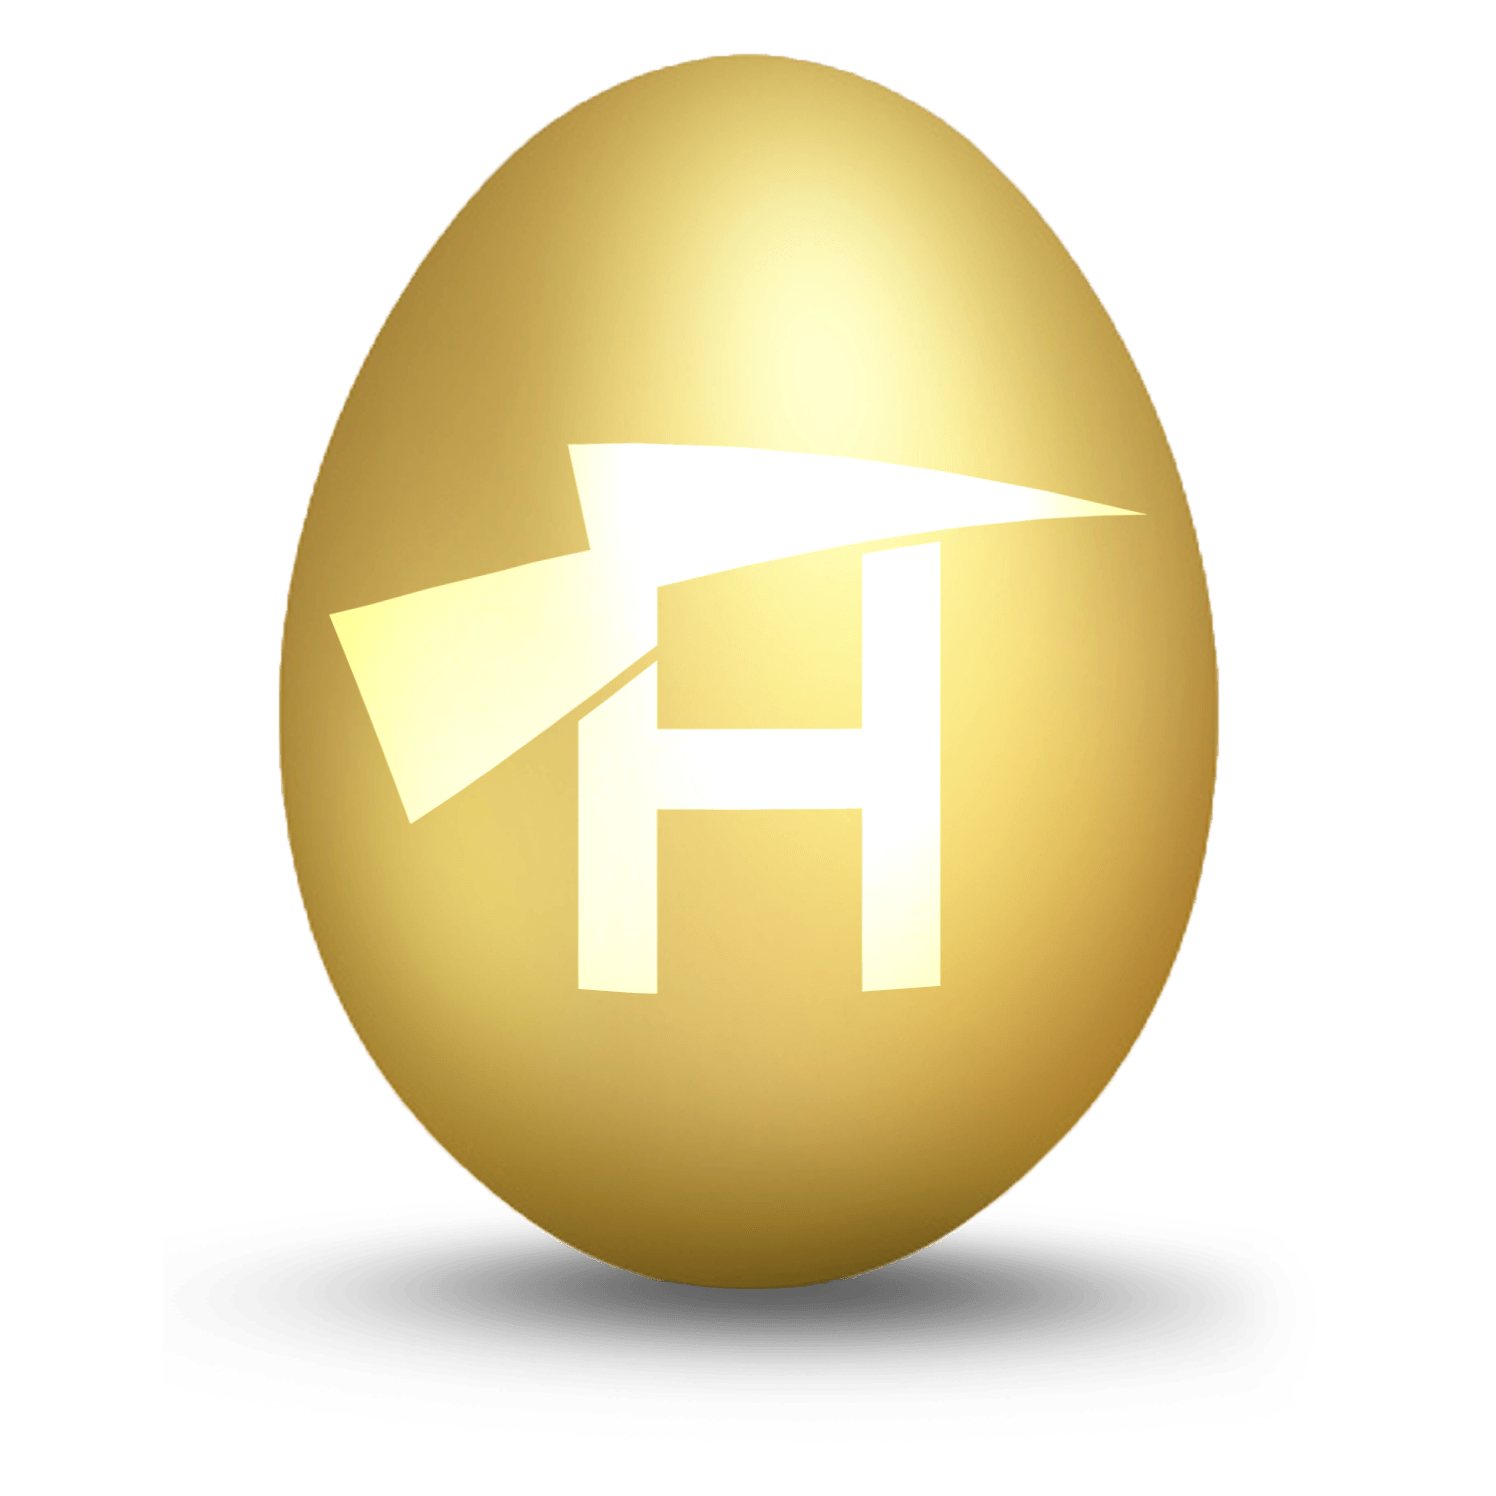 A golden egg with the letter h on it